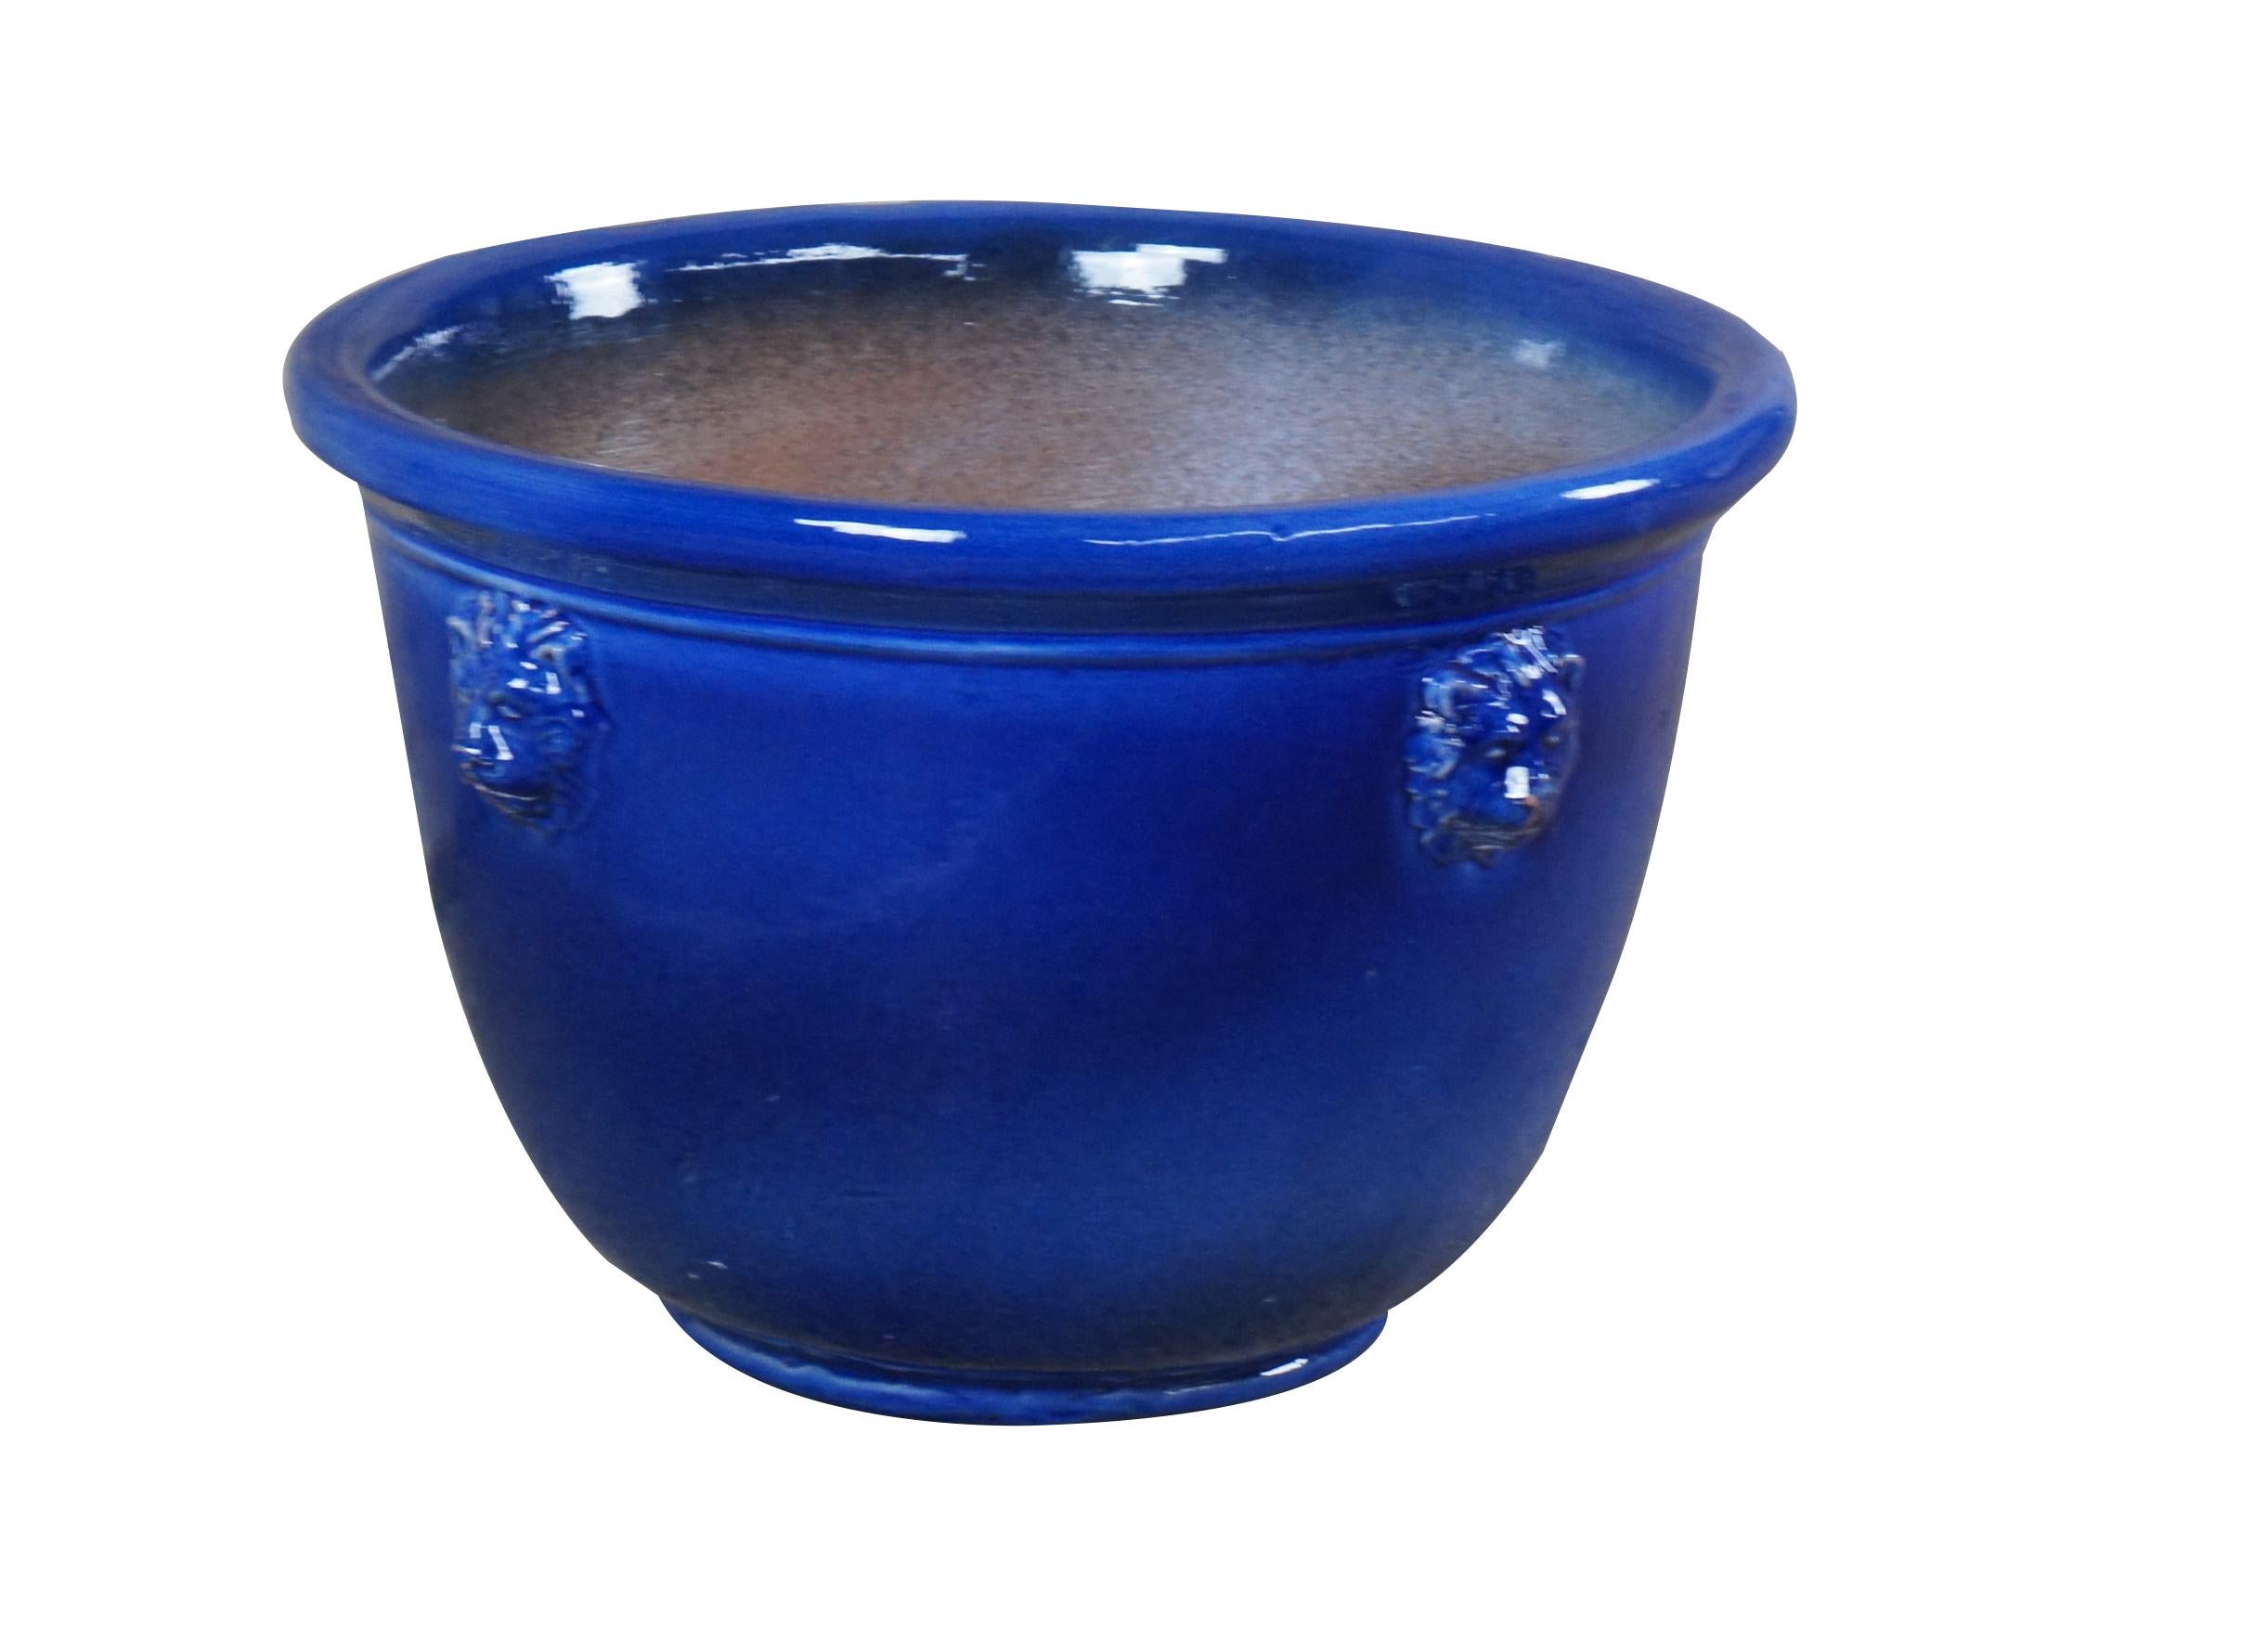 Handmade ceramic blue pot by Barrielle Aubagne.  Glazed in blue with lion heads.  Aubagne is a commune in southern French 

Dimensions:
17.5